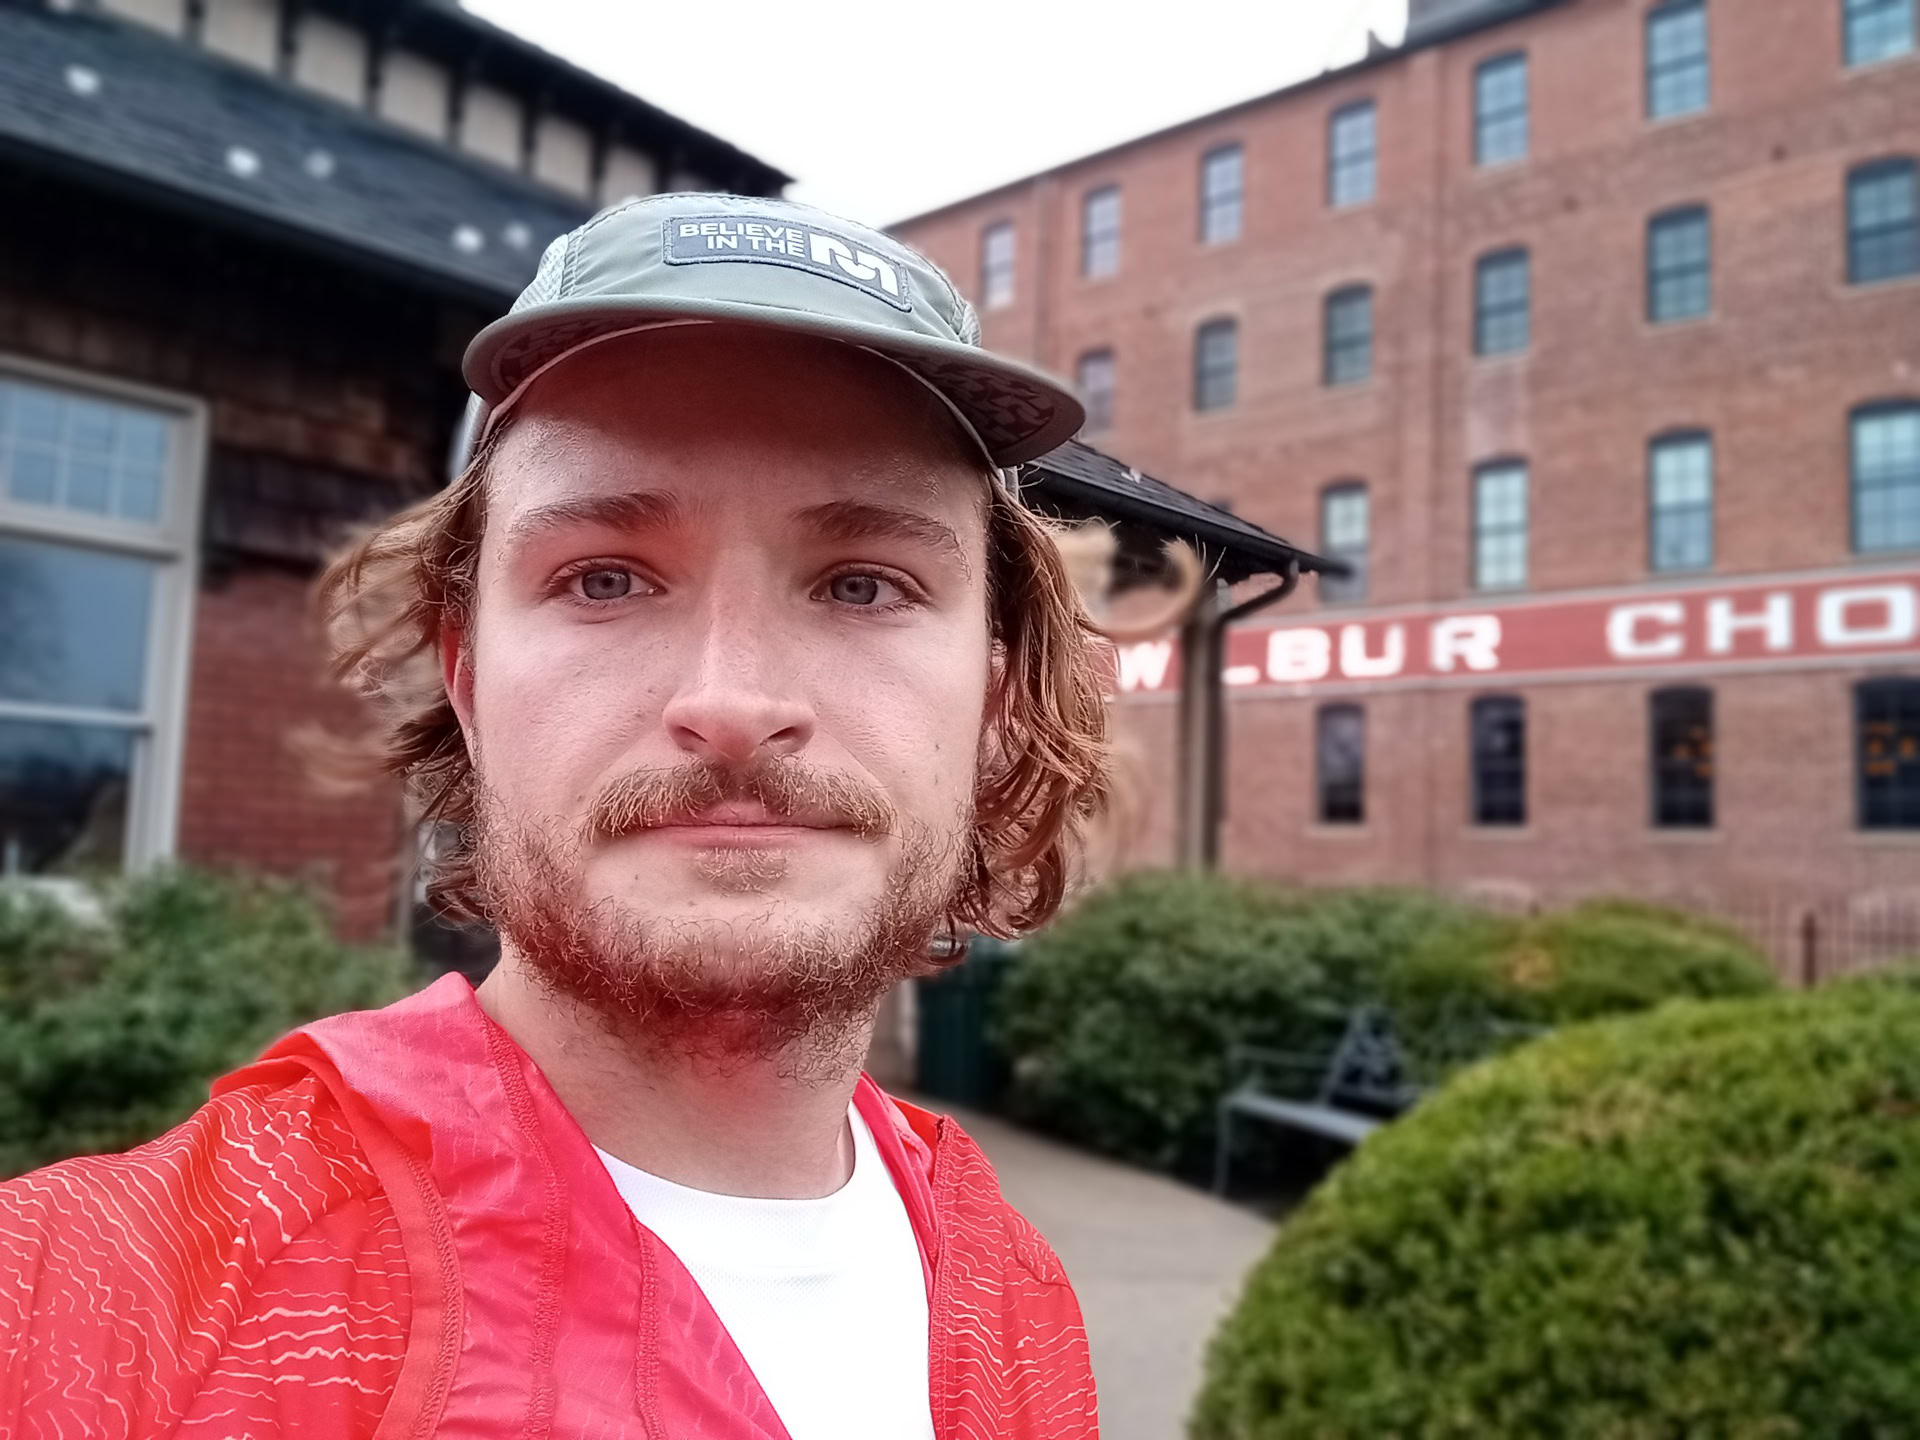 Moto g stylus portrait selfie fair curly hair and facial hair wearing a white t-shirt and red top, with a baseball cap, outdoors in front of a red brick building.